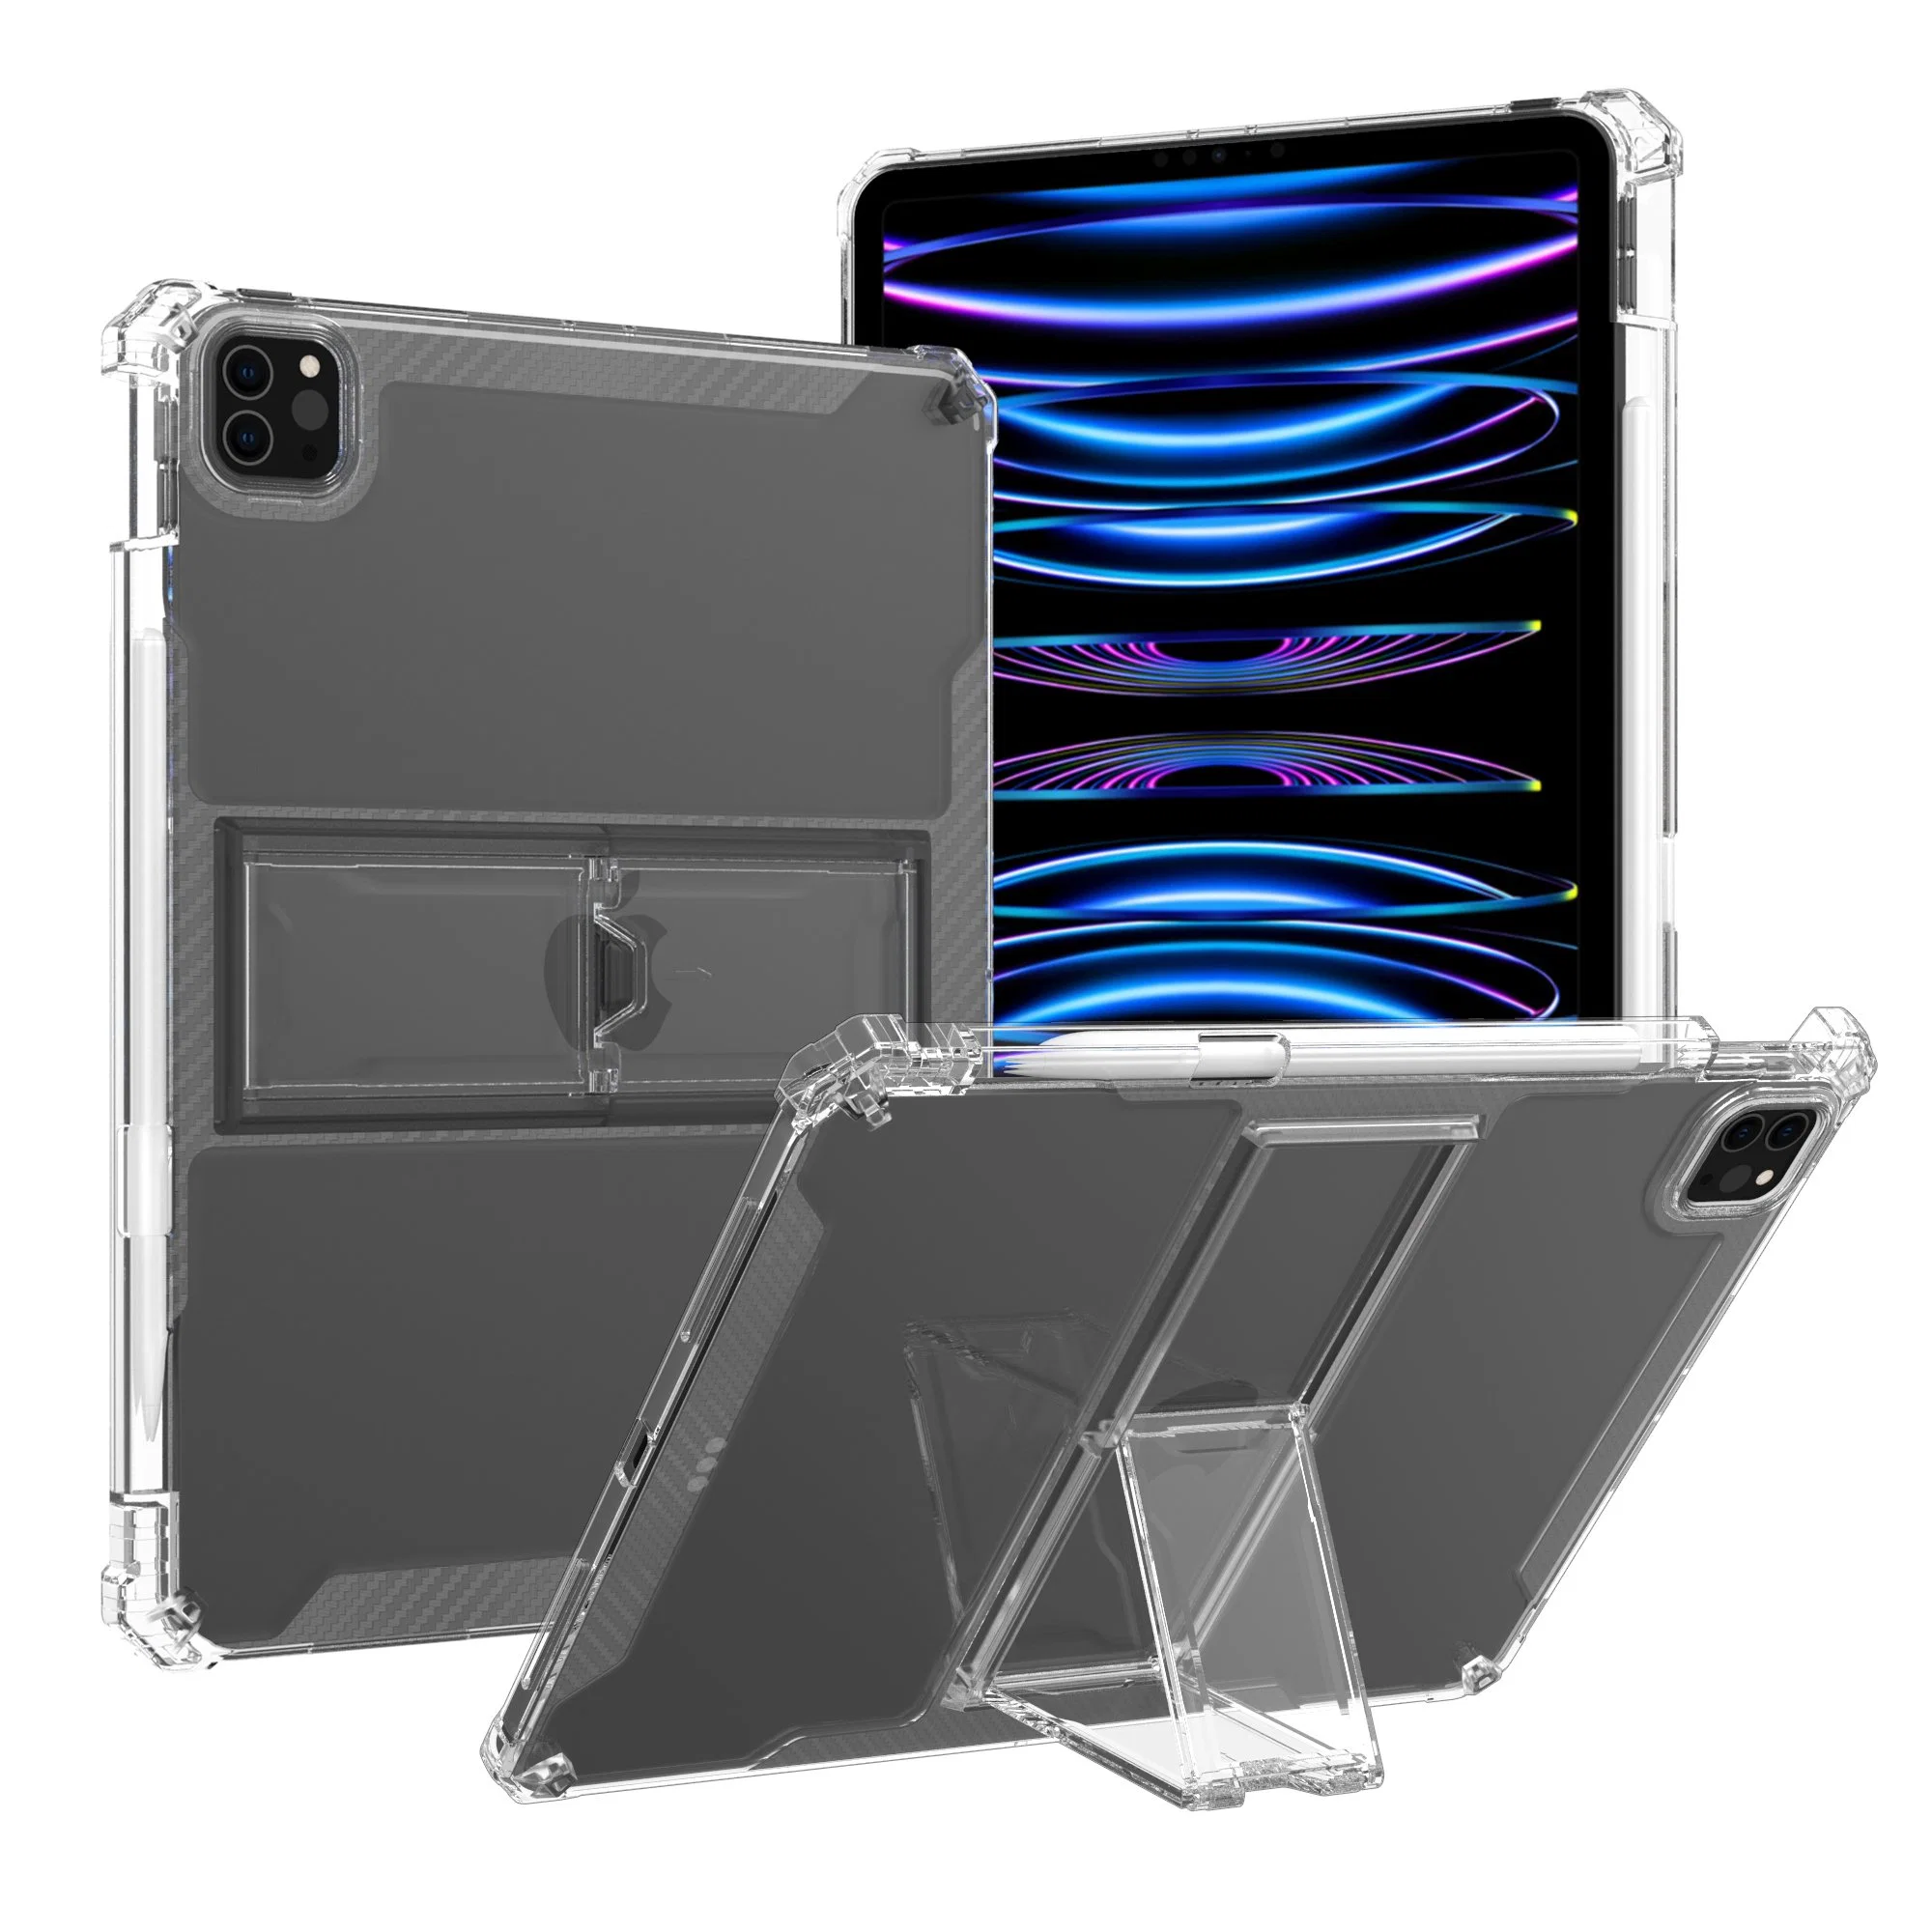 Shockproof TPU Clear Acrylic Stand Case with Pencil Slot for iPad PRO 3 4 5 6 12.9 Inch 2018/2020/2021/2022